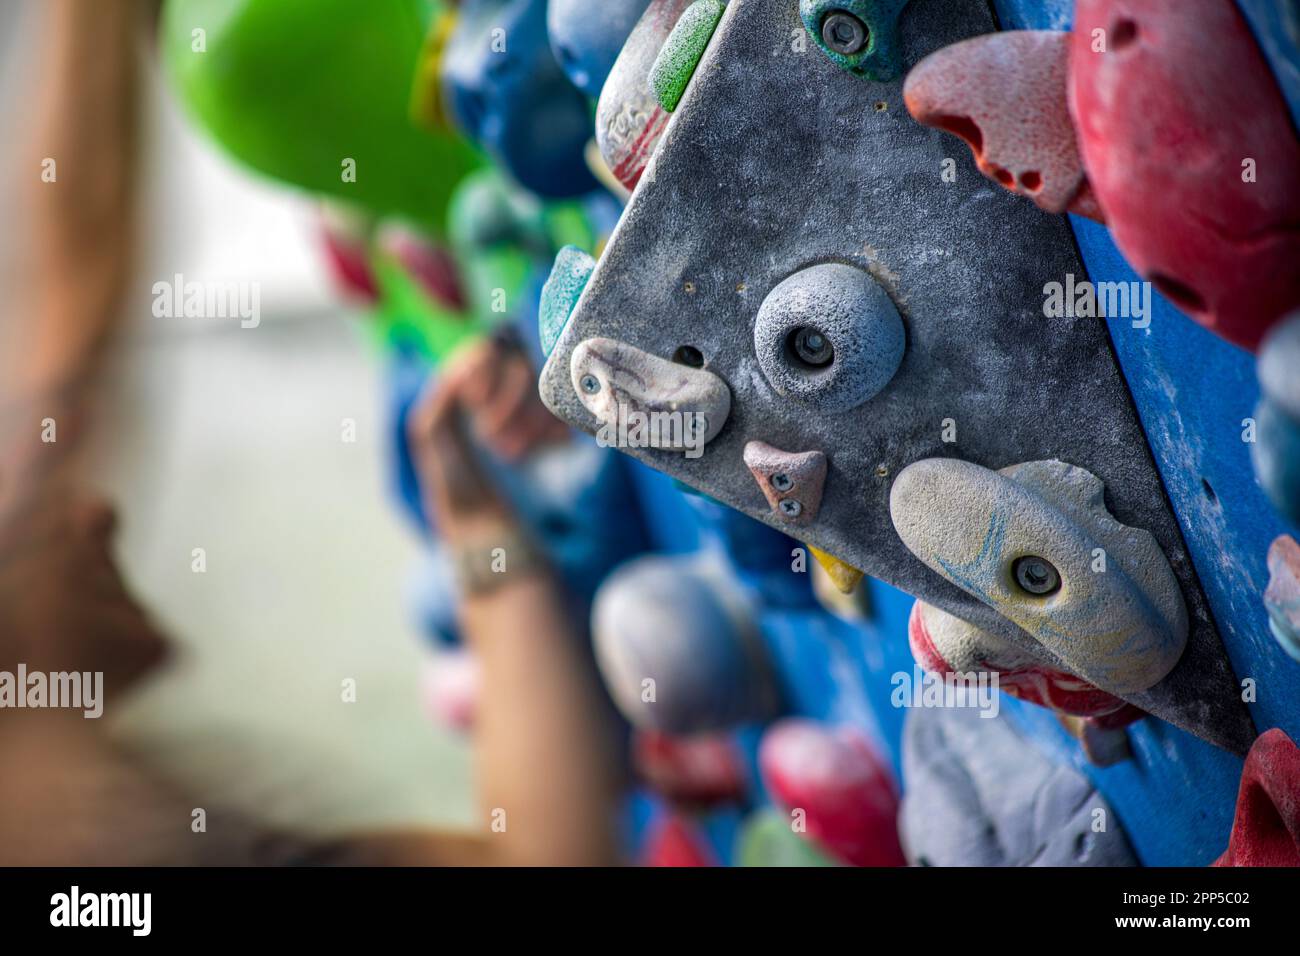 Detail of a vertical wall of an indoor climbing wall with holds of different colors to practice climbing with a blurred person climbing Stock Photo